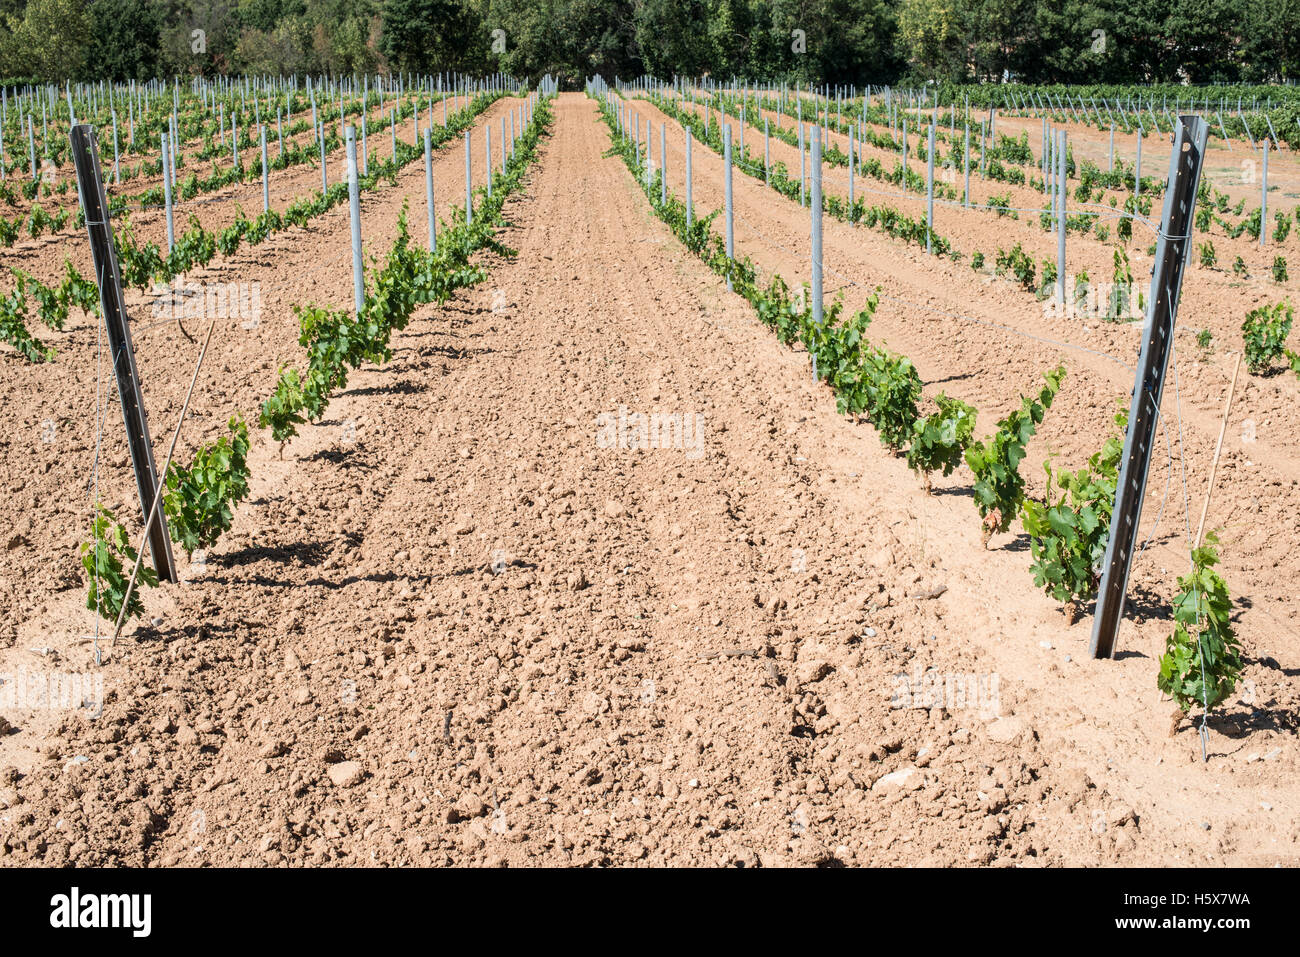 Young vines in rows Stock Photo